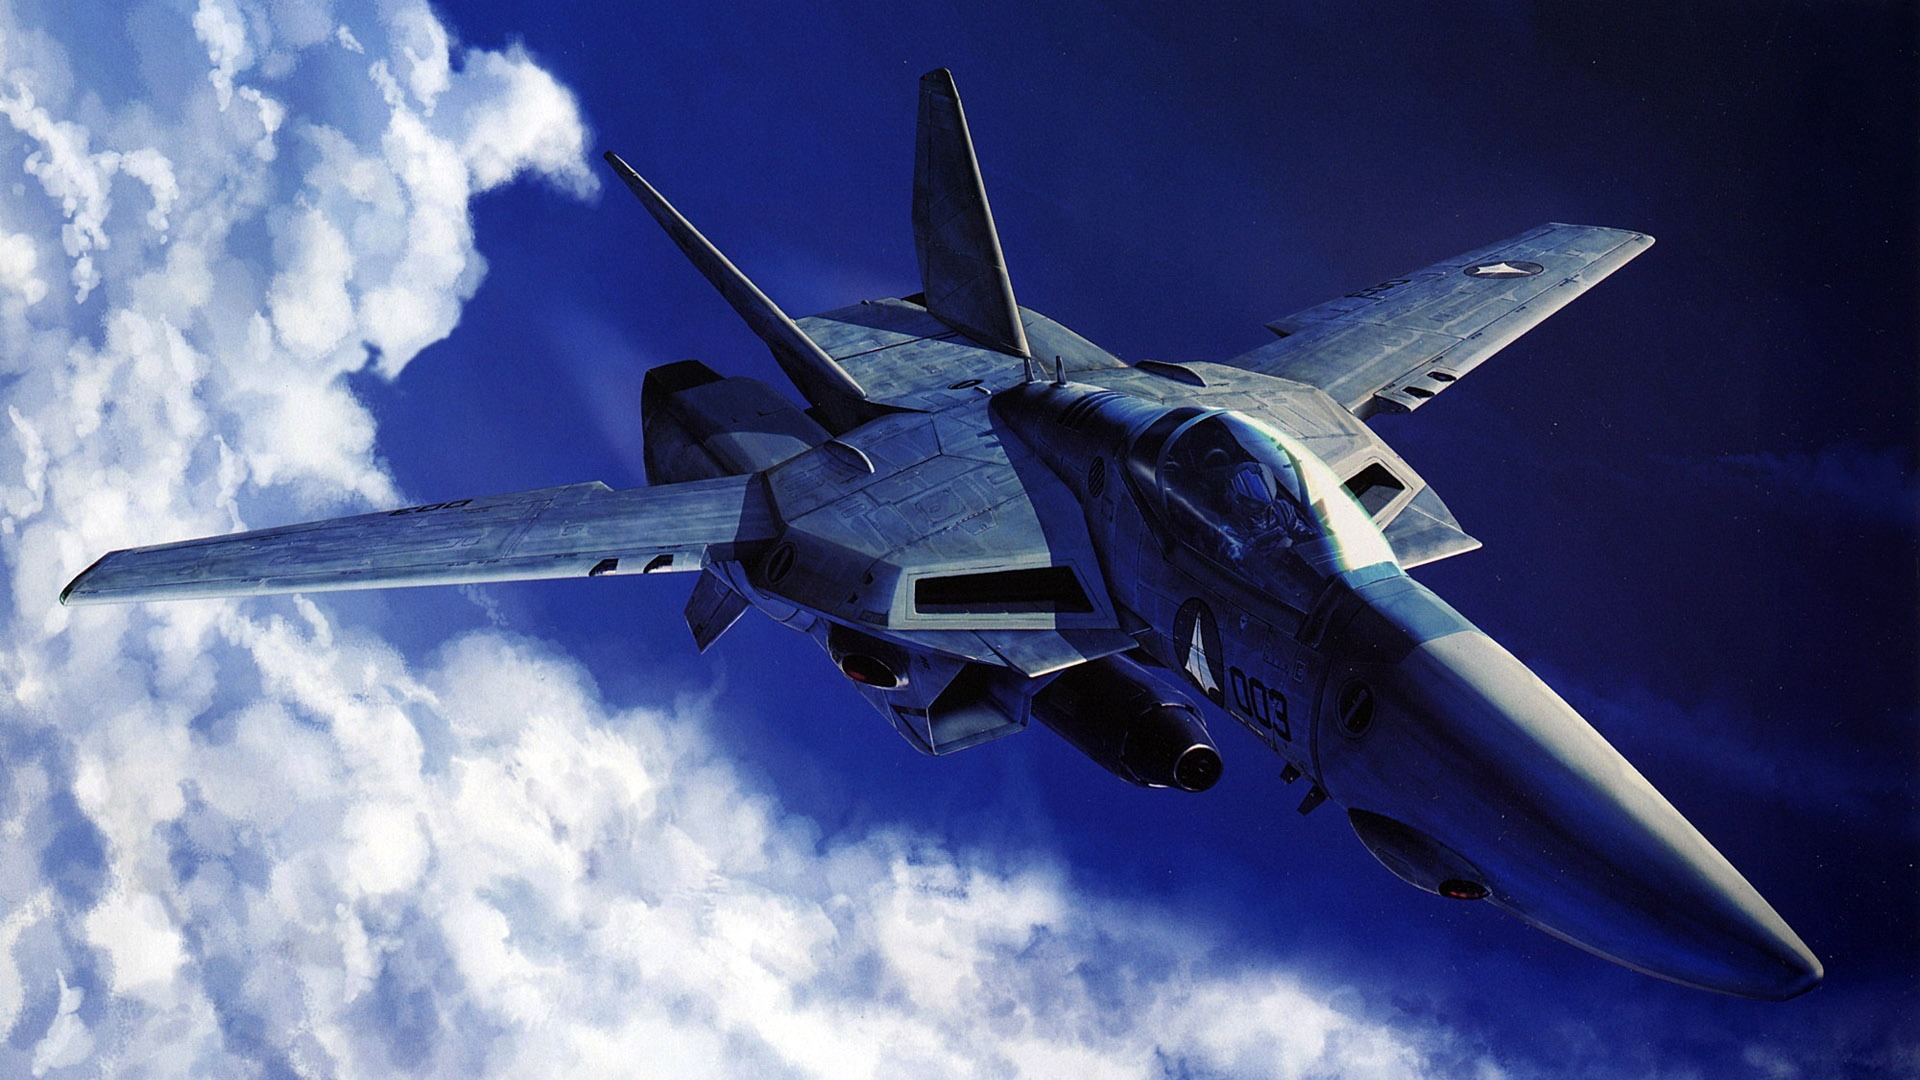 Jet Fighter Military Aircraft Hd Wallpaper 1920x1080 : Wallpapers13.com